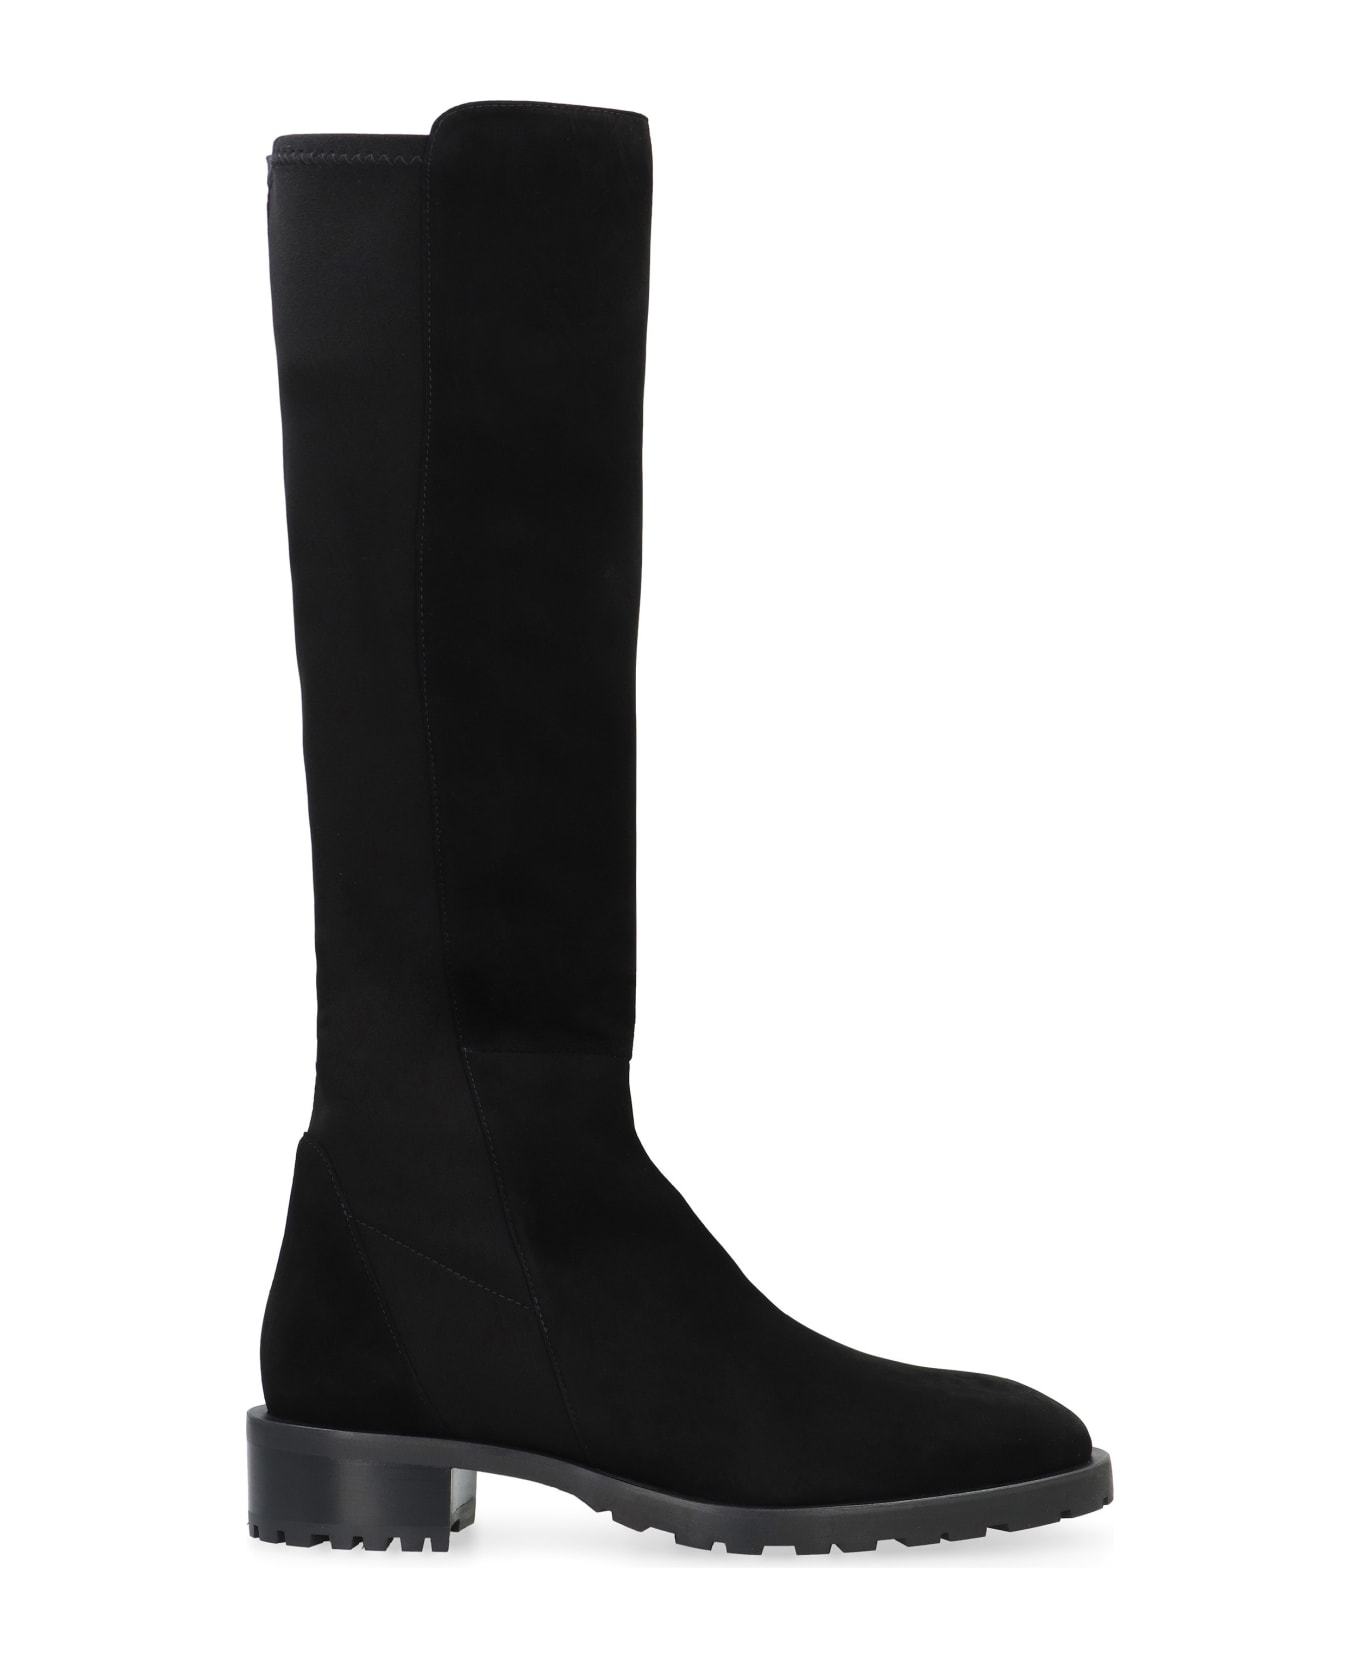 Stuart Weitzman 5050 Leather And Stretch Fabric Boots - black ブーツ